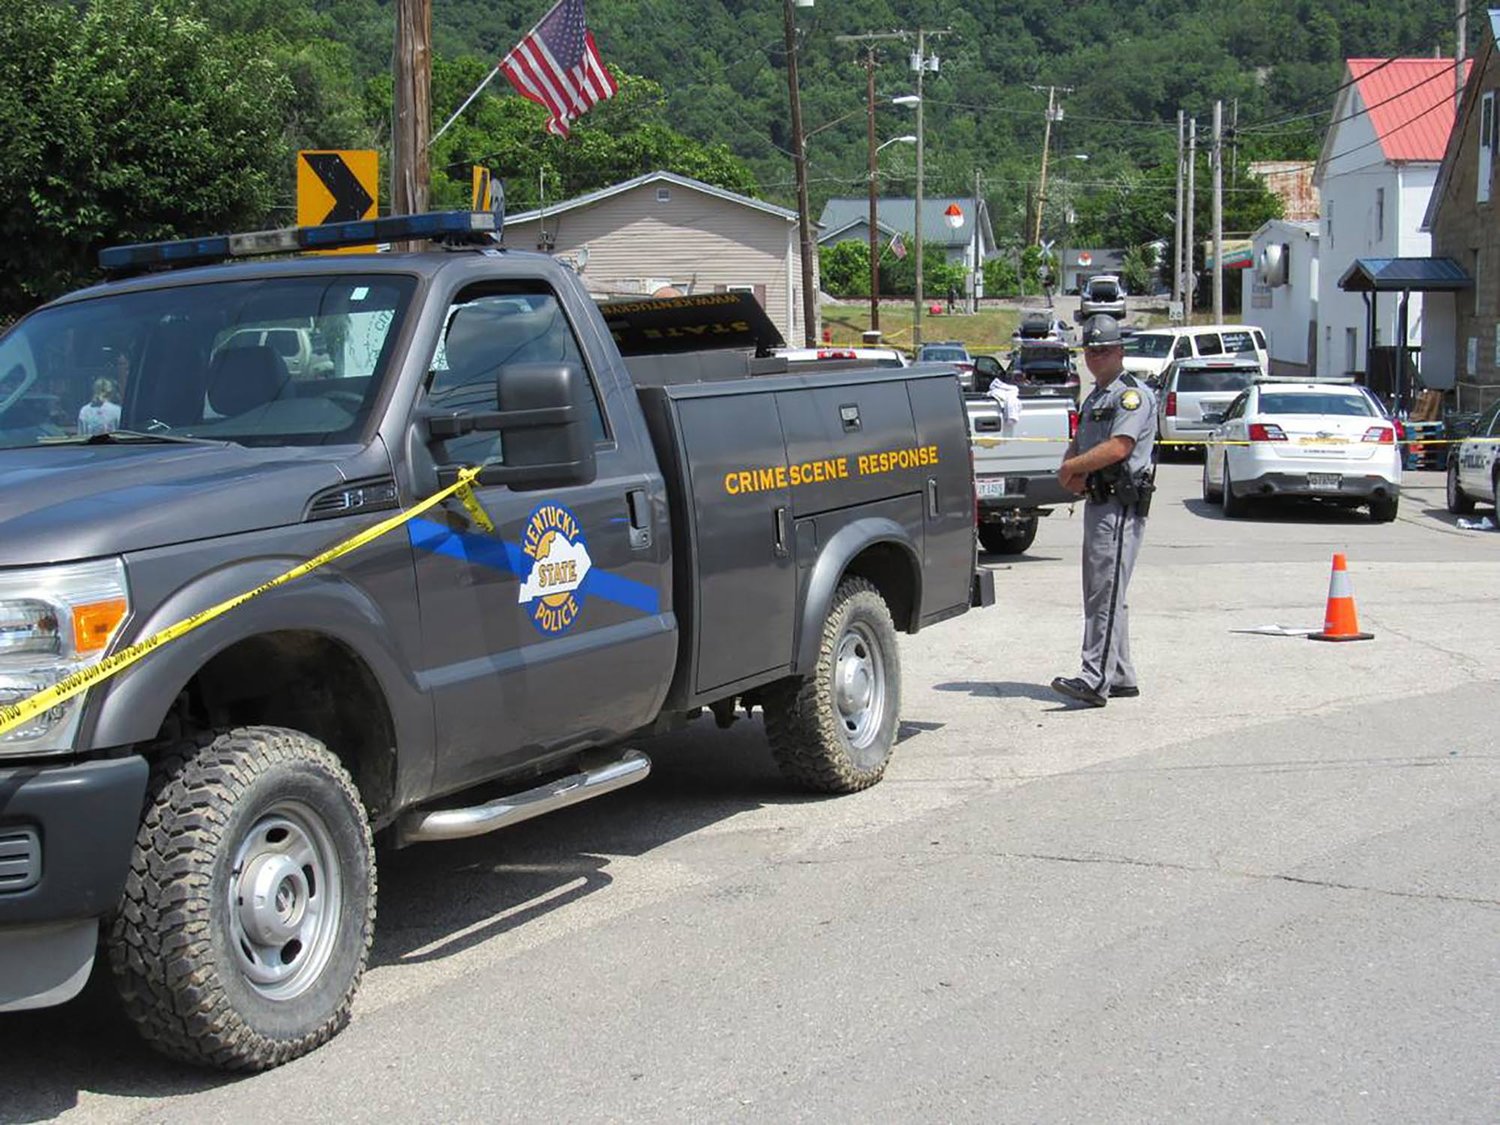 Kentucky State Police officers block off a street in Allen, a small town in Floyd County, Kentucky, on July 1, 2022, as the investigation continues into a shooting in which three police officers were killed. (Bill Estep/Lexington Herald-Leader/TNS)